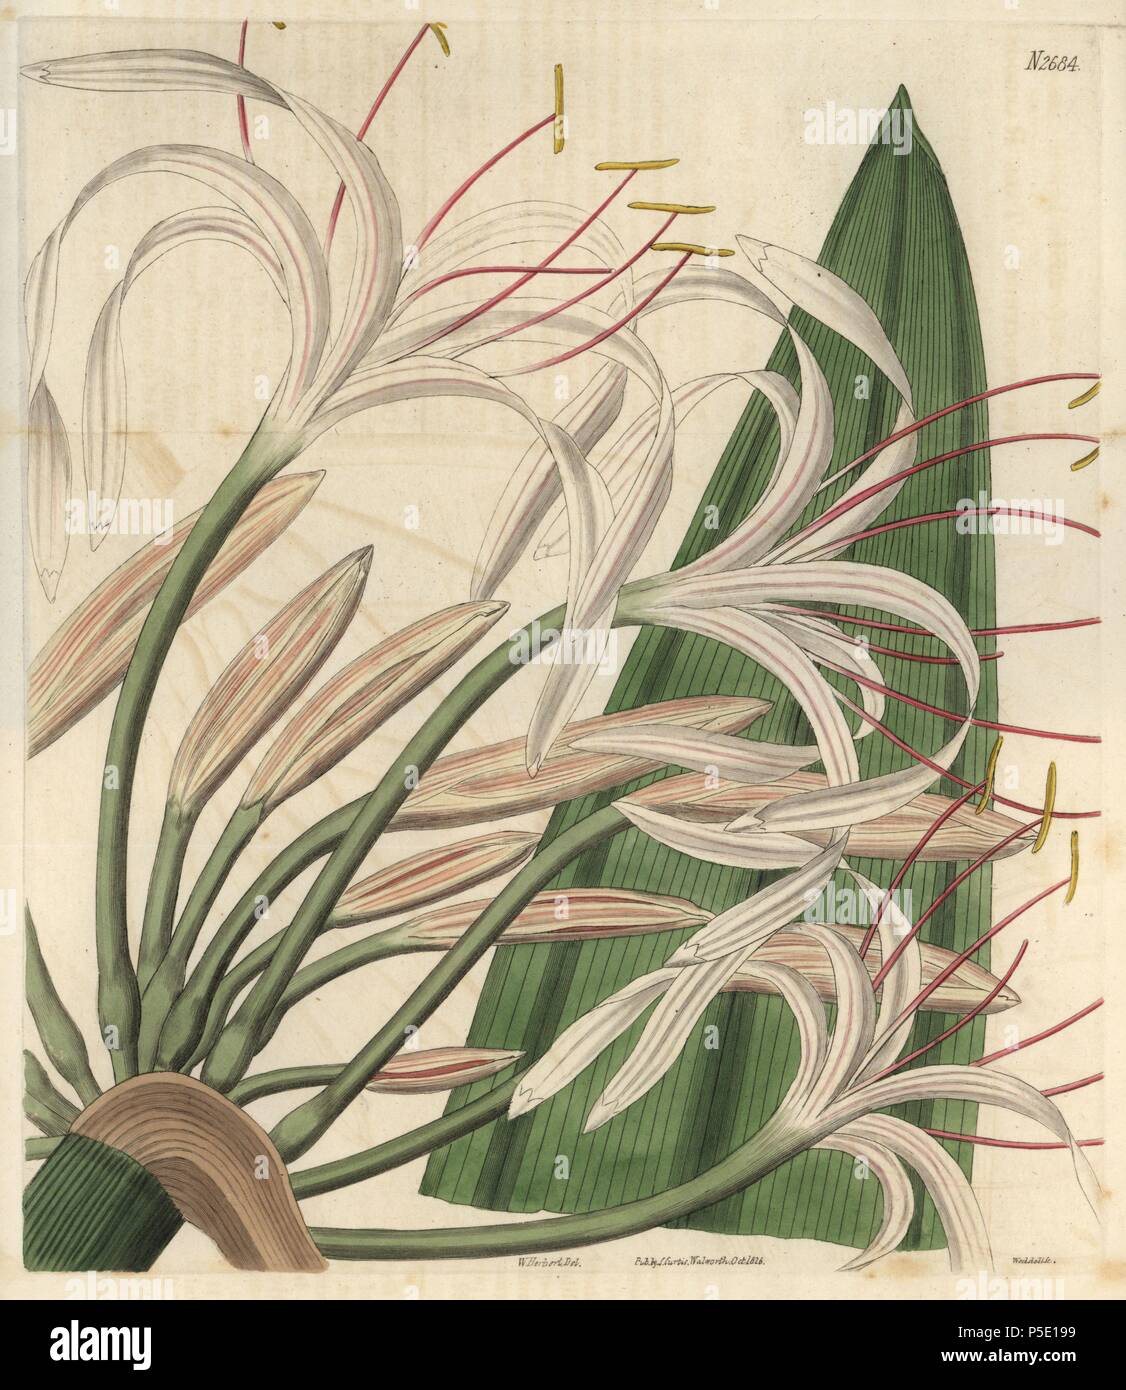 Tall rangoon crinum. Crinum procerum. White crinum lily with fine pink lines from Rangoon, Burma.. Illustration by William Herbert, engraved by Weddell. Handcolored copperplate engraving from Samuel Curtis's 'The Curtis Botanical Magazine' 1826. . Herbert (1778-1847) was a clergyman, classical scholar, poet and botanist. A keen gardener, he was an expert on bulbous plants and developed many new varieties. . Samuel Curtis, cousin and son-in-law to William Curtis, took over the Botanical Magazine in 1826. Samuel re-named it 'The Curtis Botanical Magazine' and enlisted the help of William Jackson Stock Photo